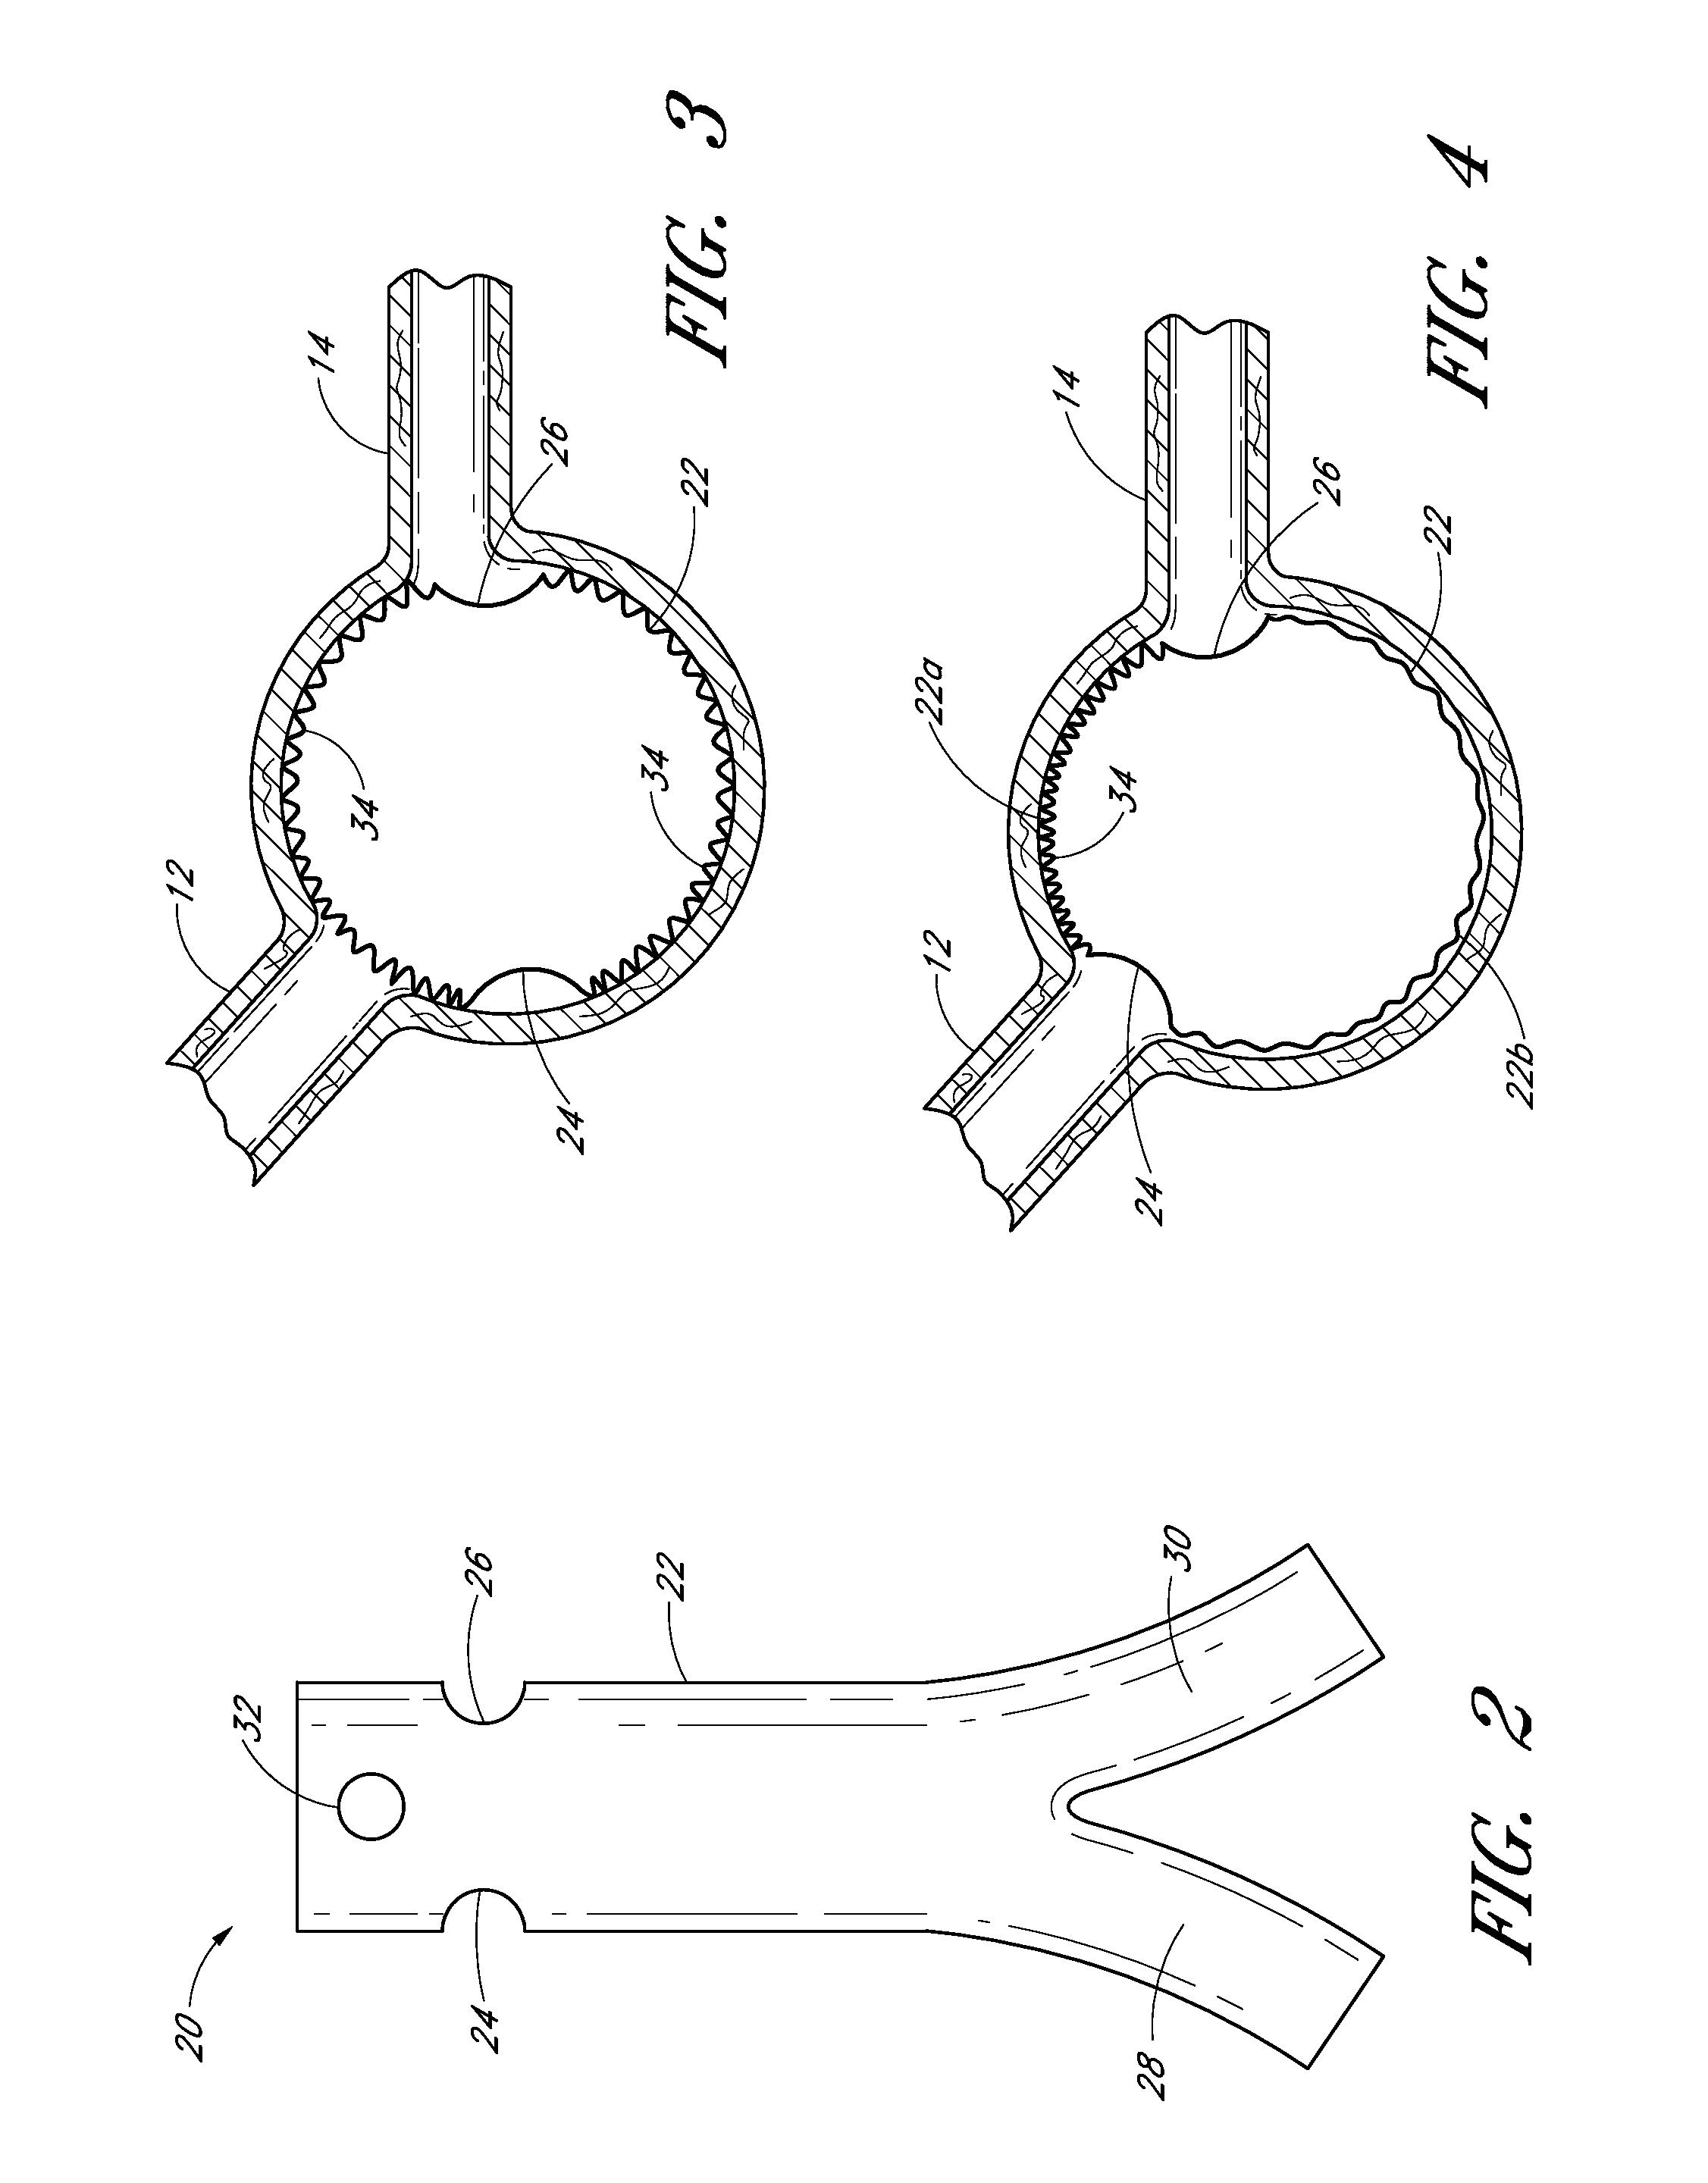 Apparatus and method of placement of a graft or graft system